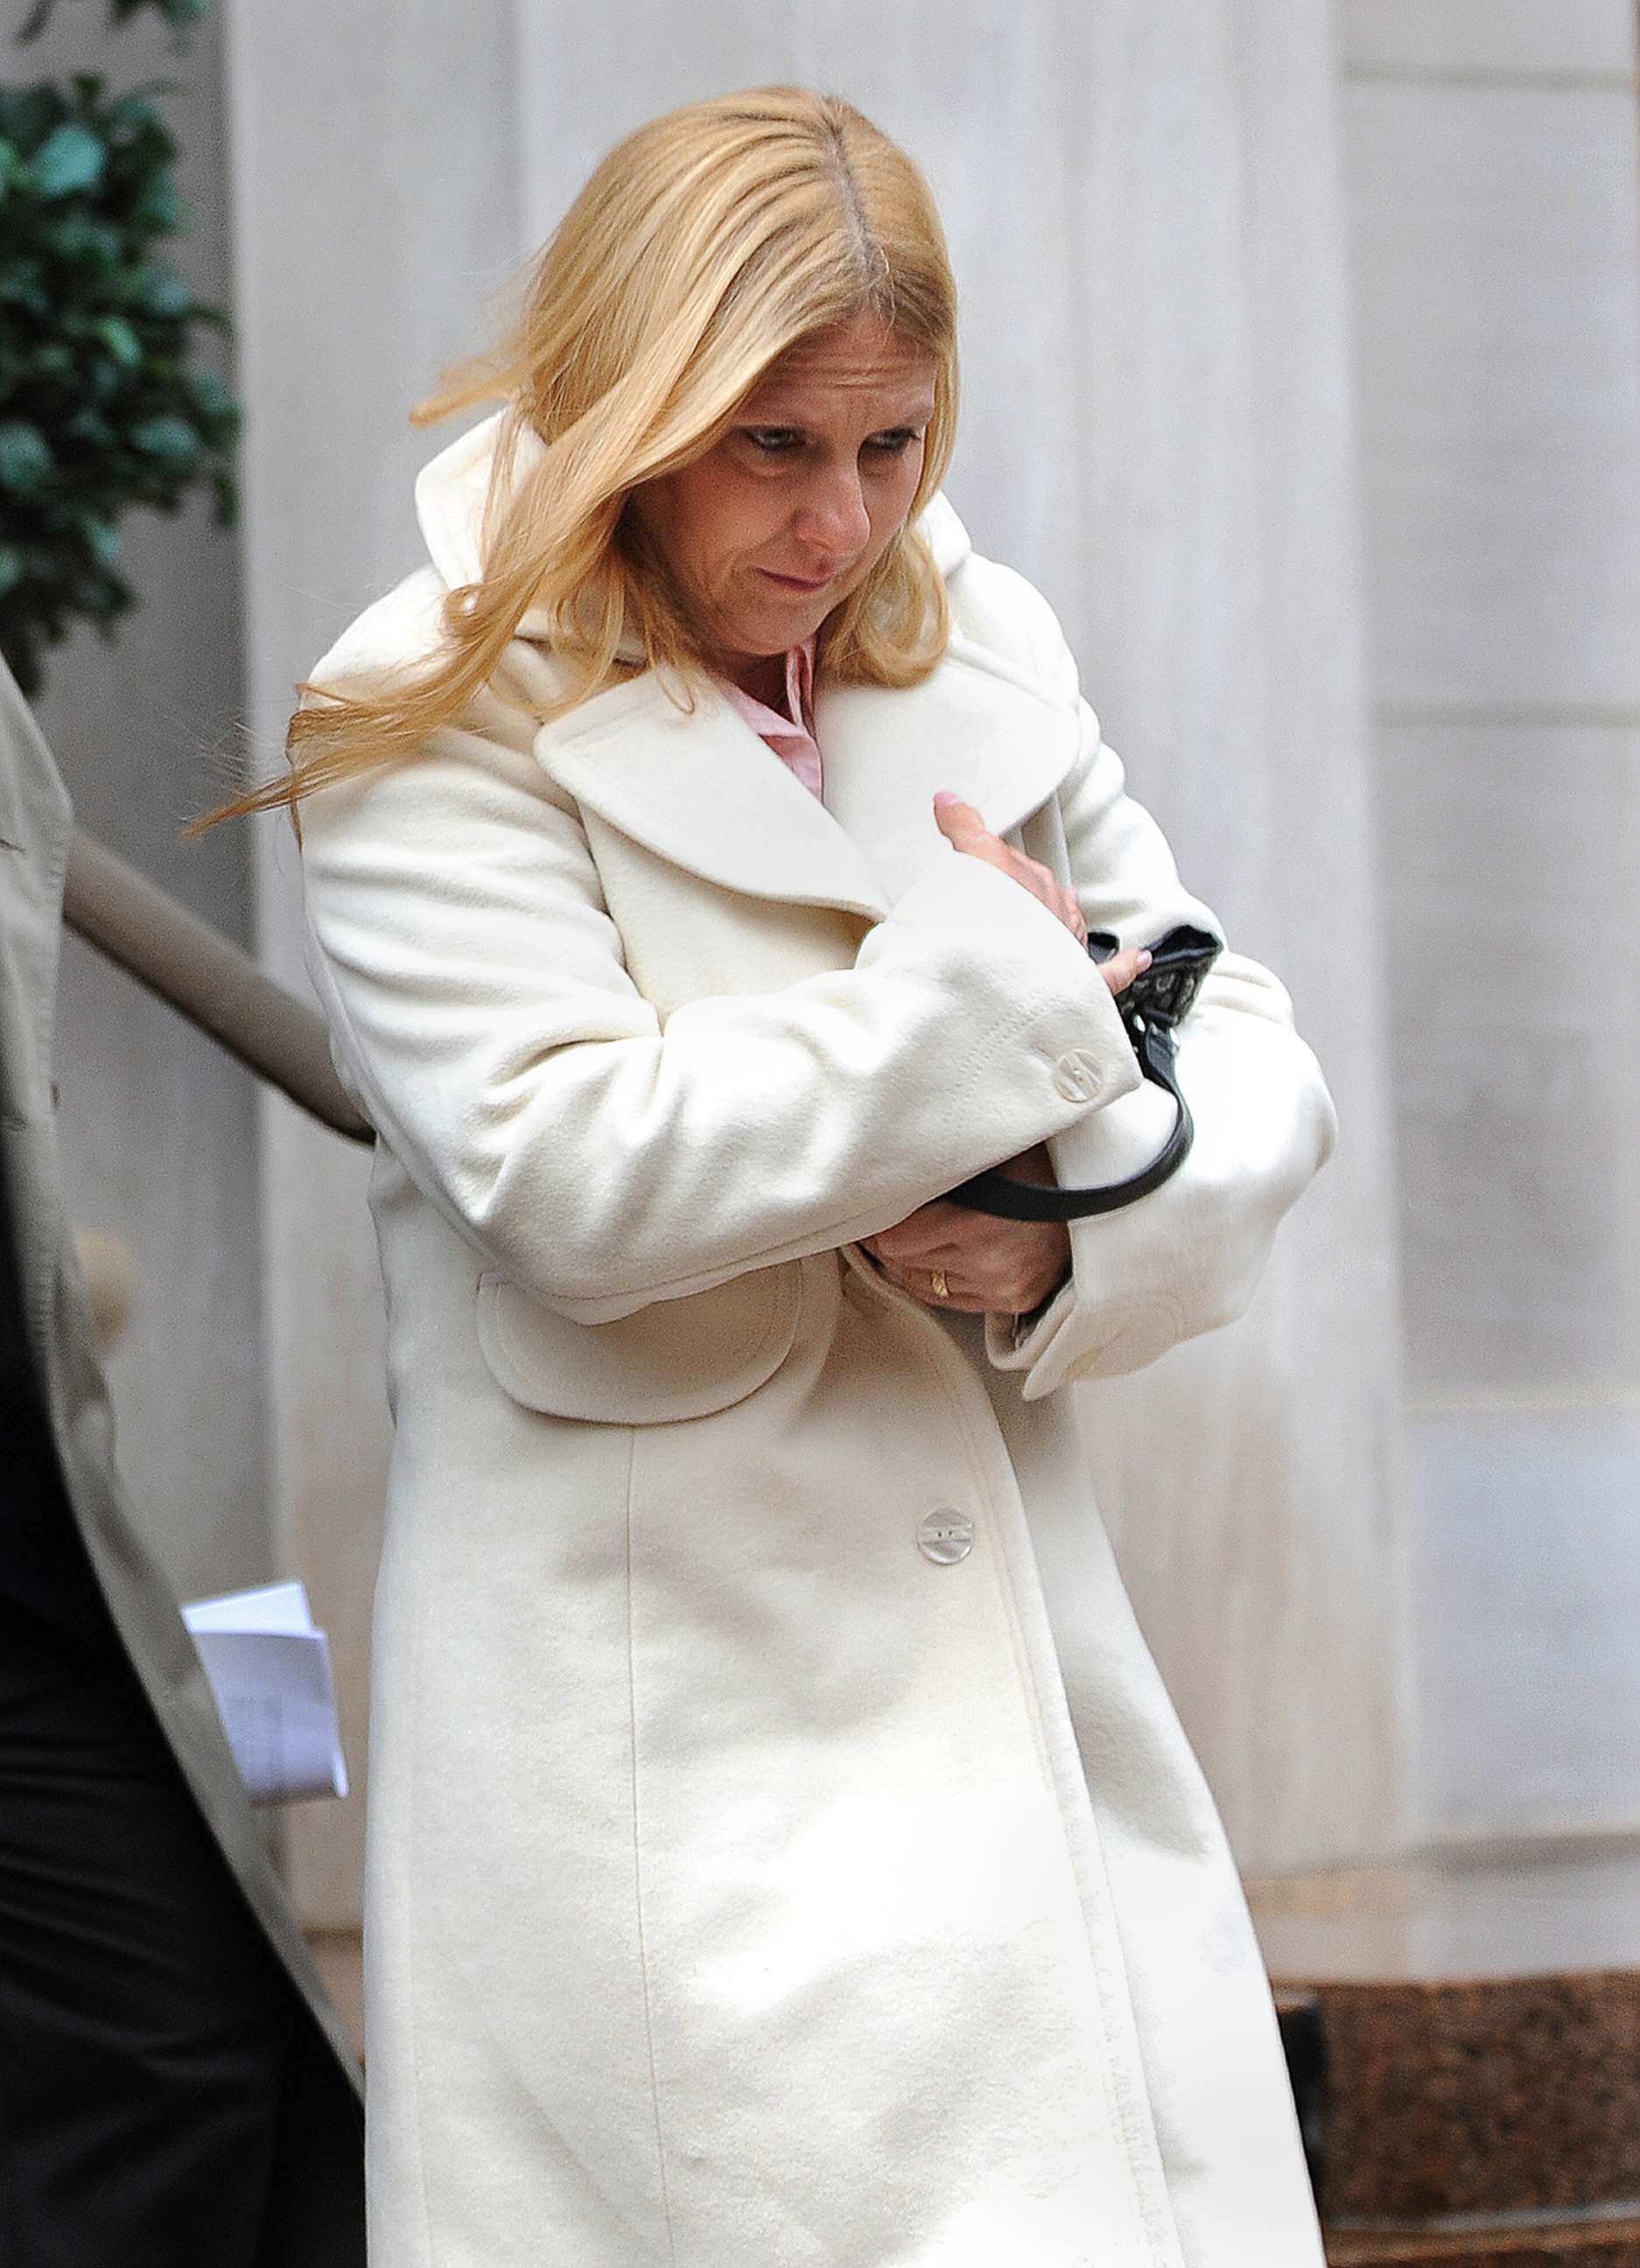 PHOTO: John Giuca's mother, Doreen Giuliano leaves the courthouse, Dec. 11, 2008.